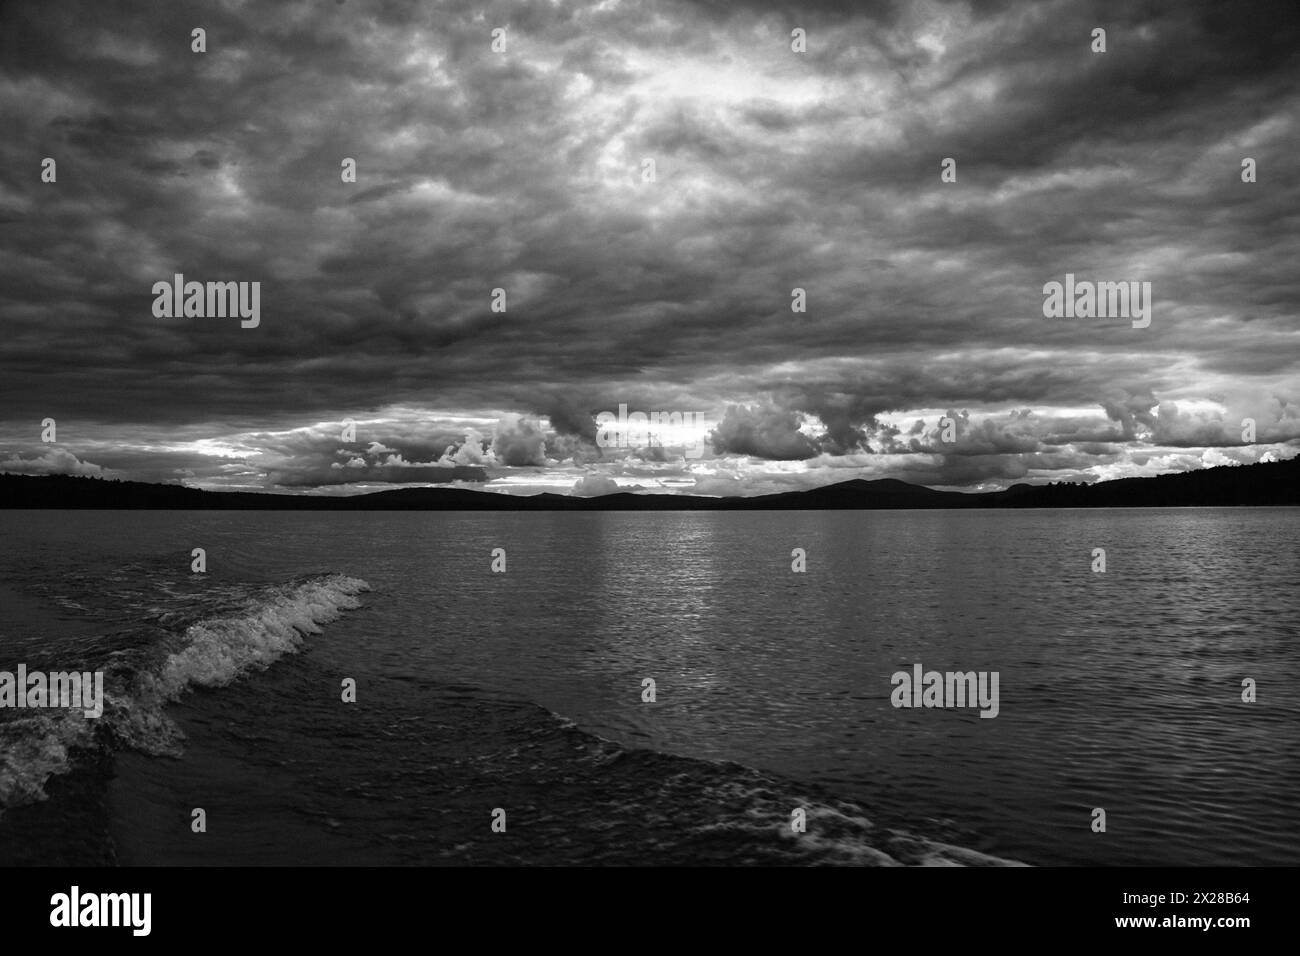 Boat wake on lake with dramatic clouds Stock Photo